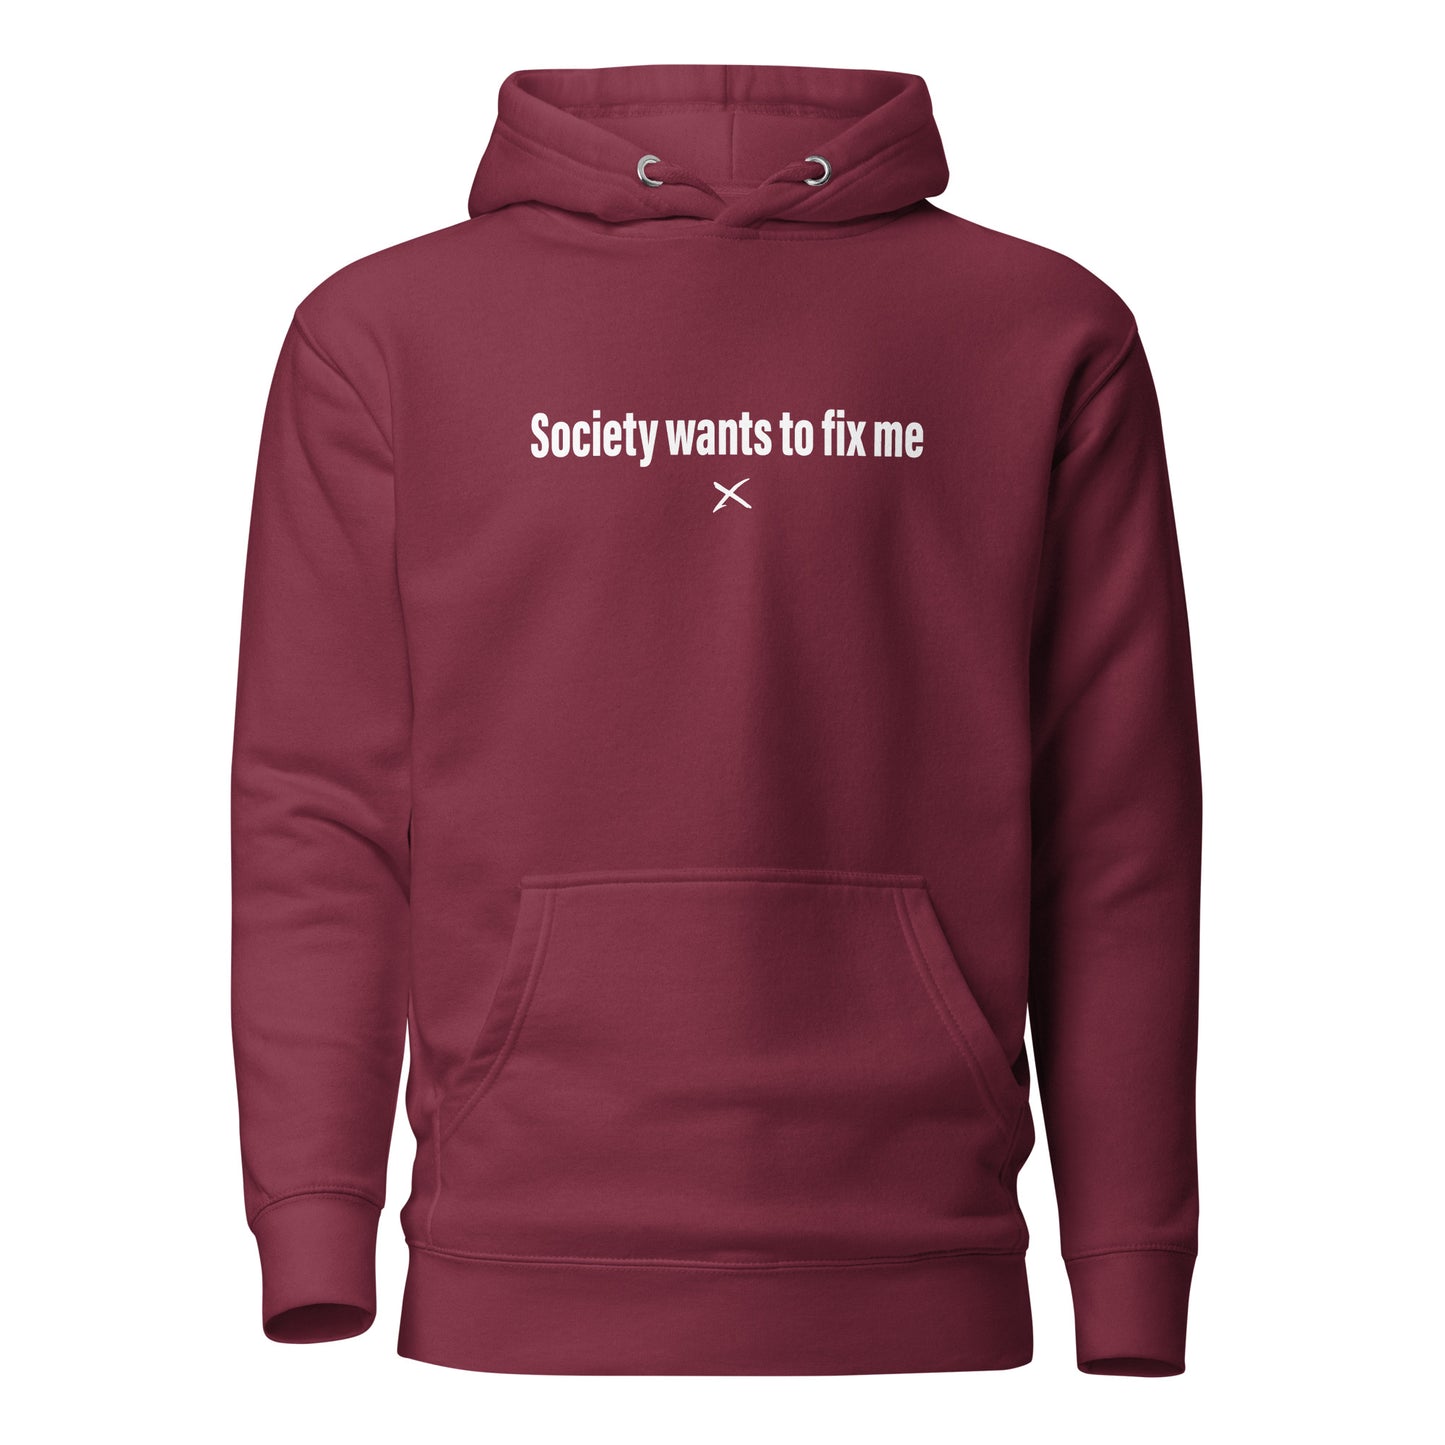 Society wants to fix me - Hoodie